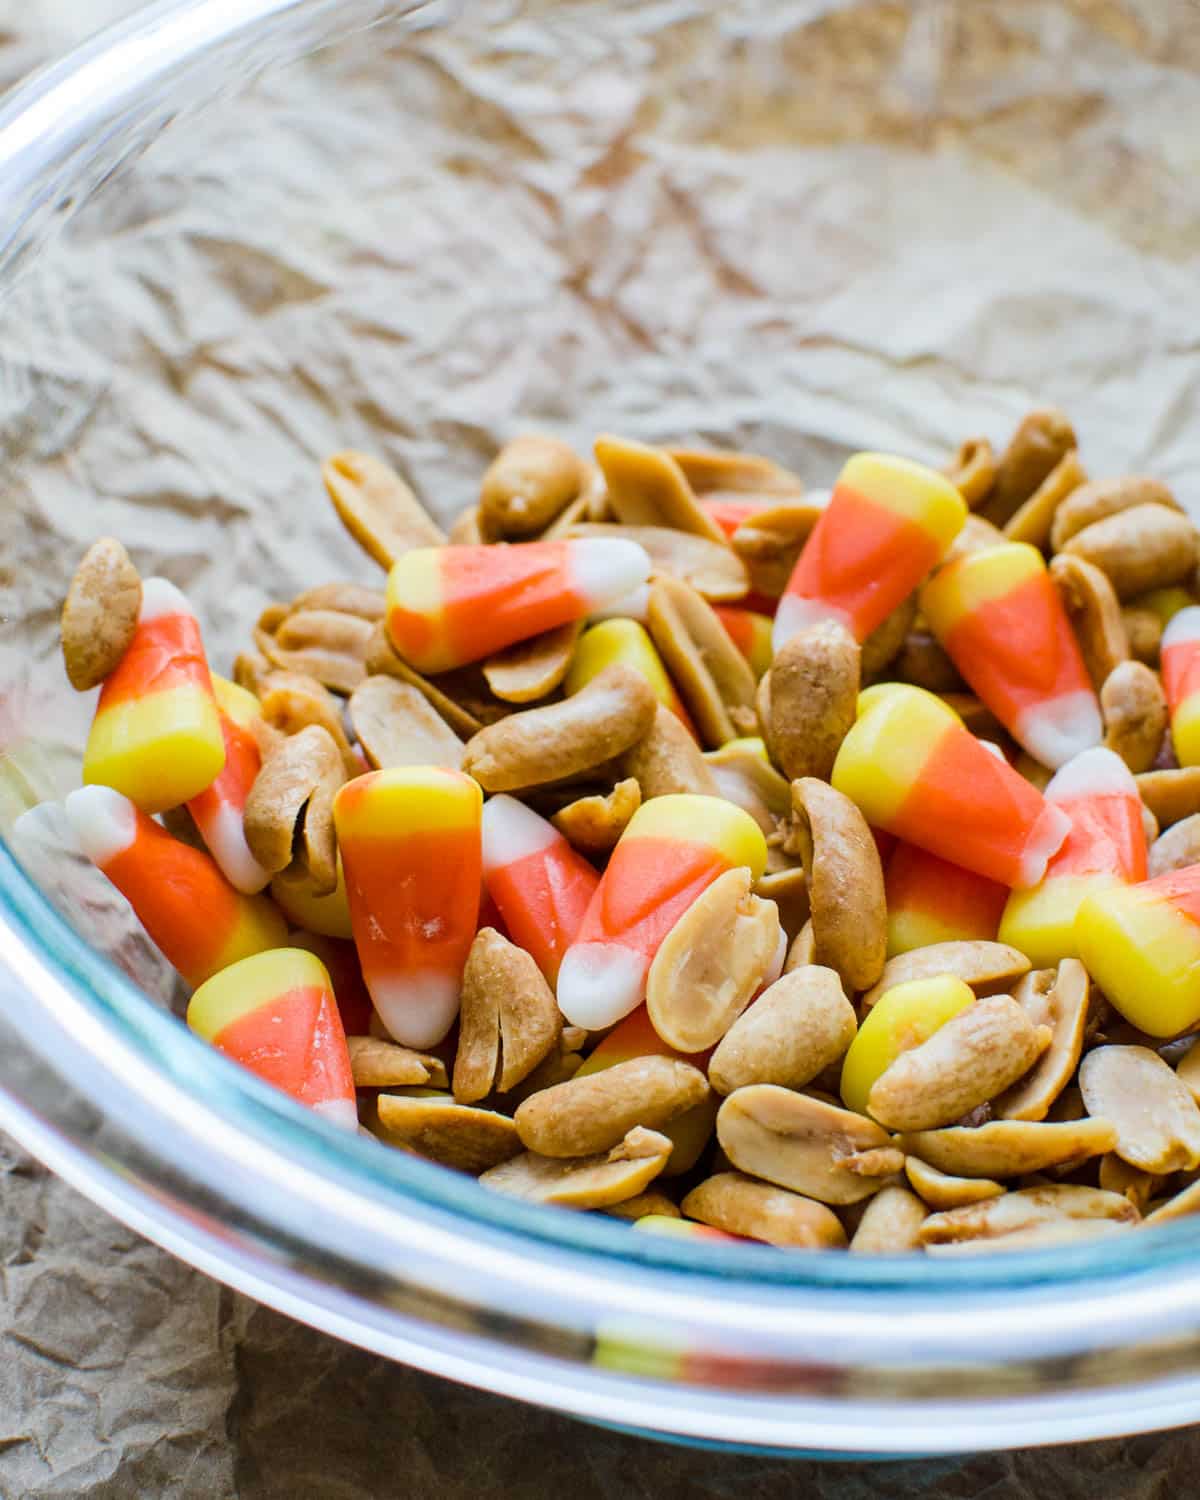 Mixing nuts with candy corn in a bowl.